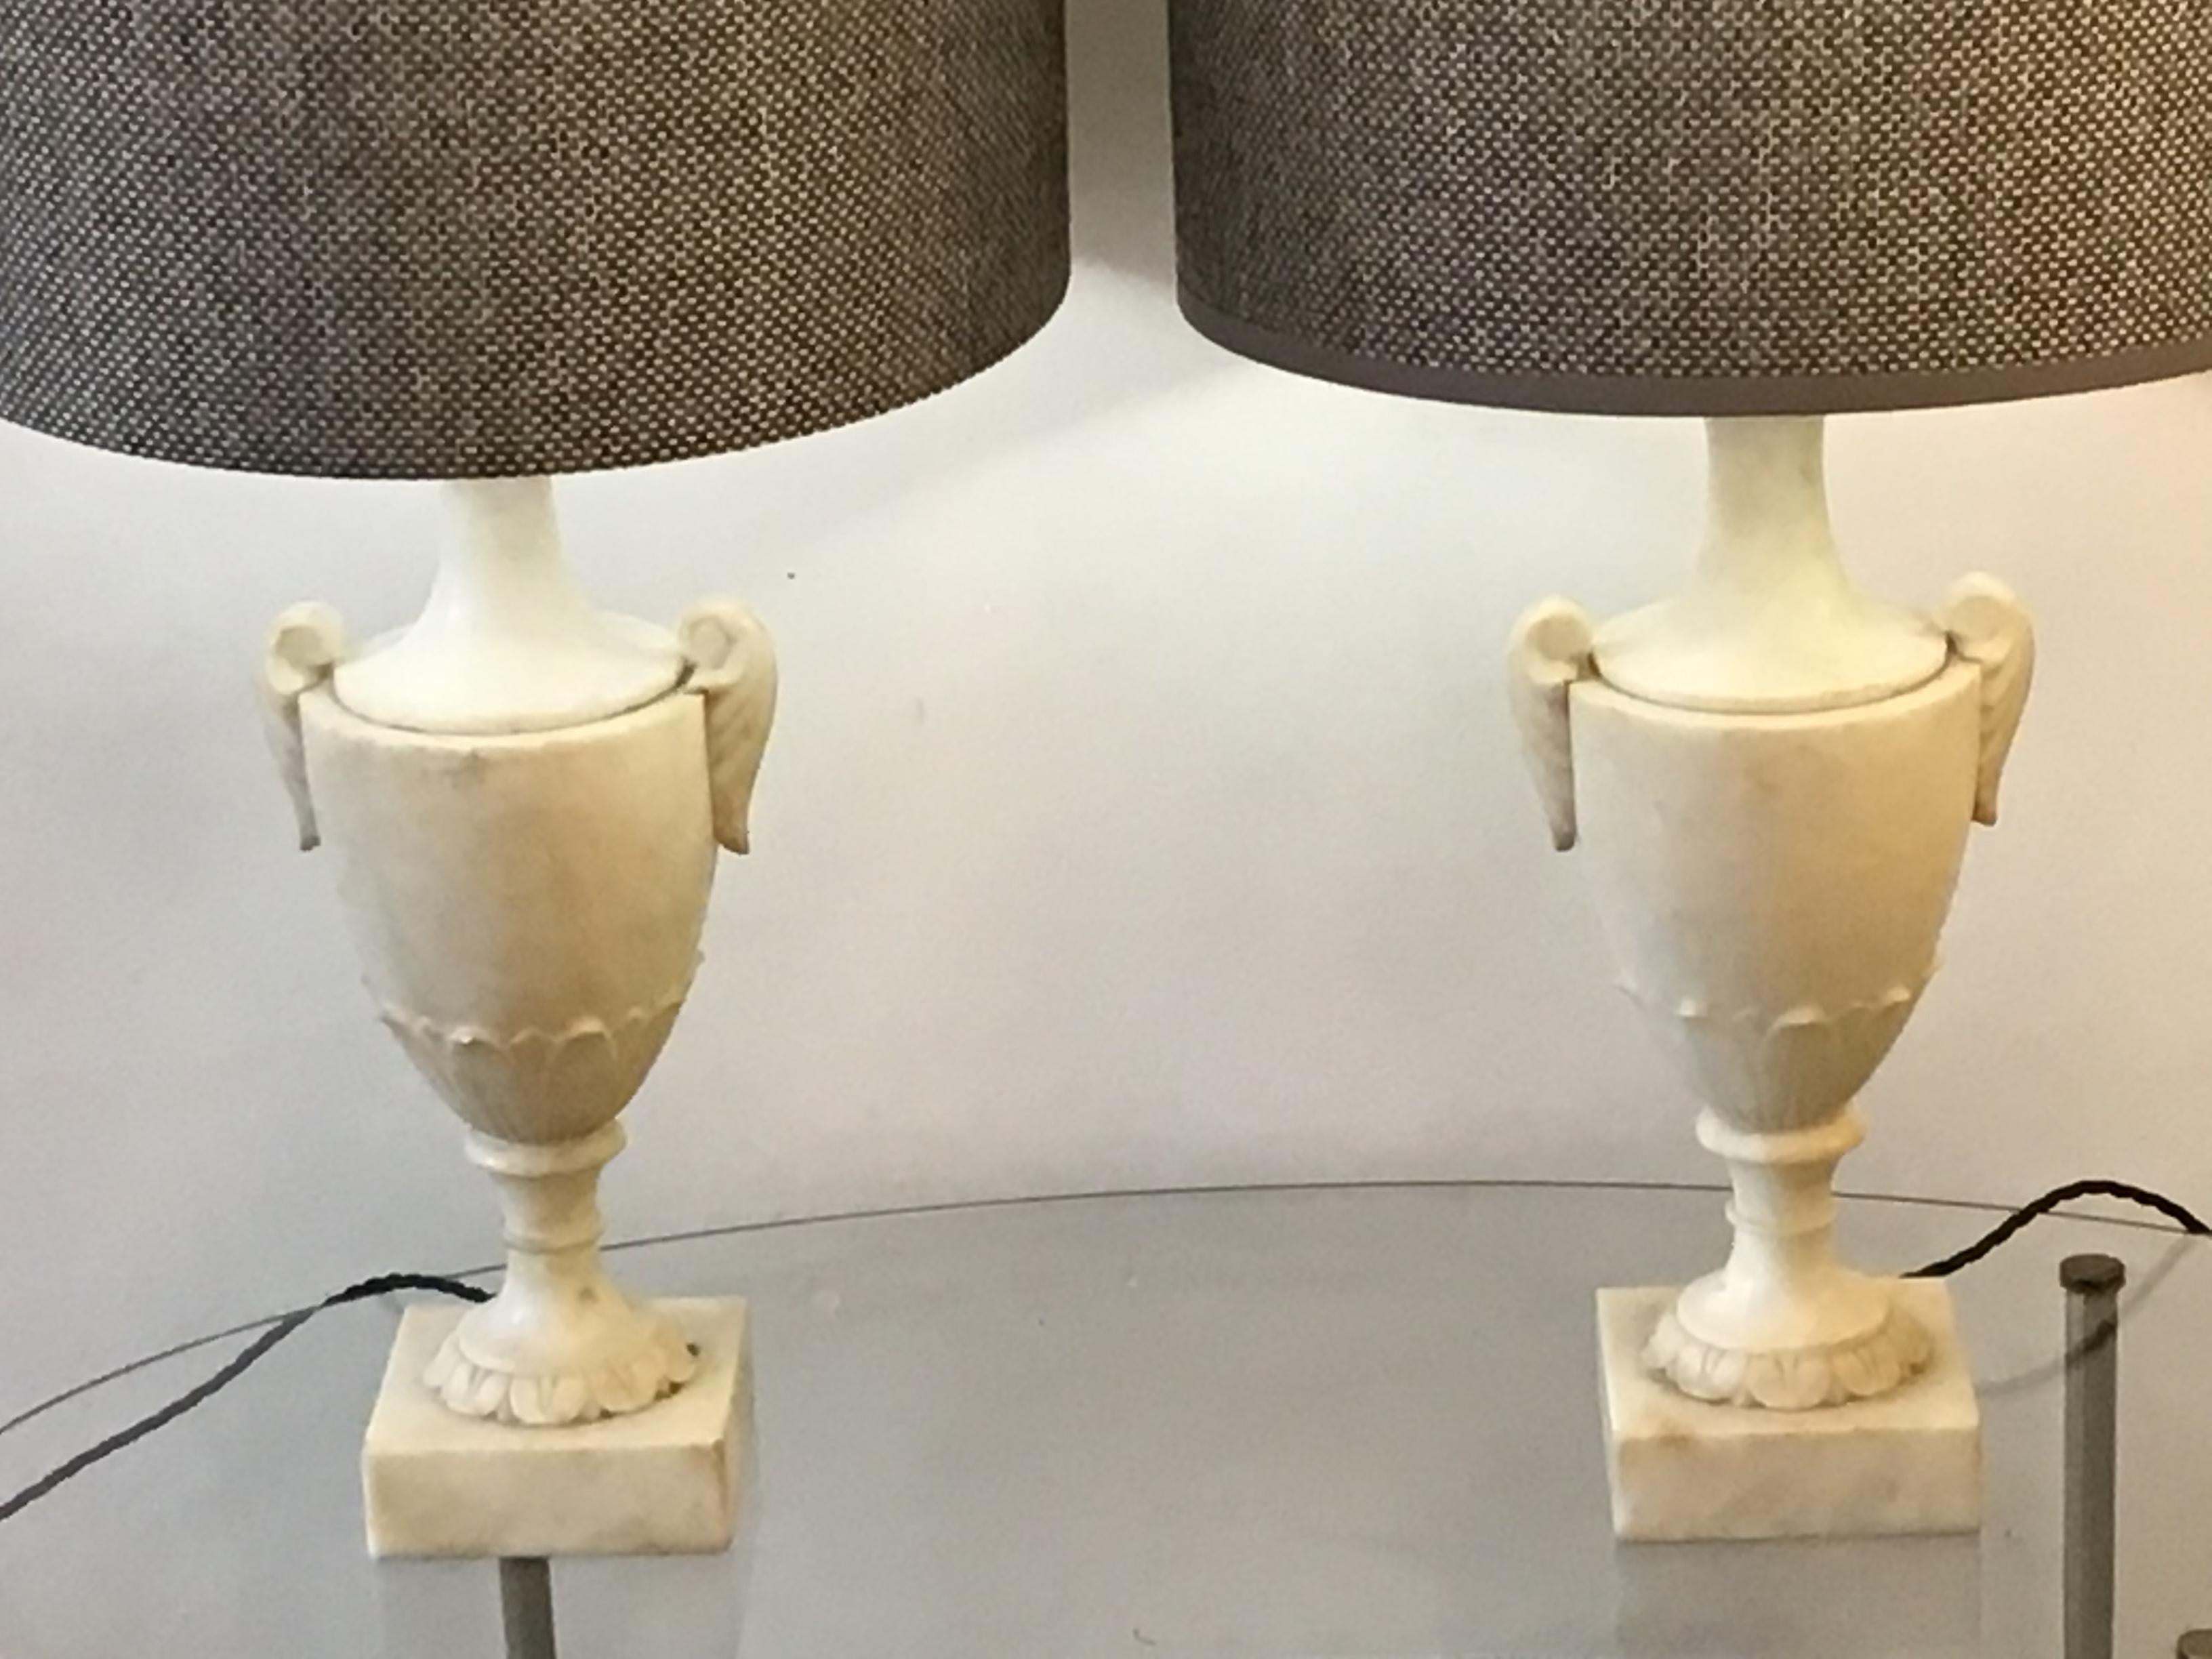 A pair of Italian alabaster lamp created in the early 20th century, The base of this Italian lamp is carved into a Classic shape re wired and tested. Cc Italian.